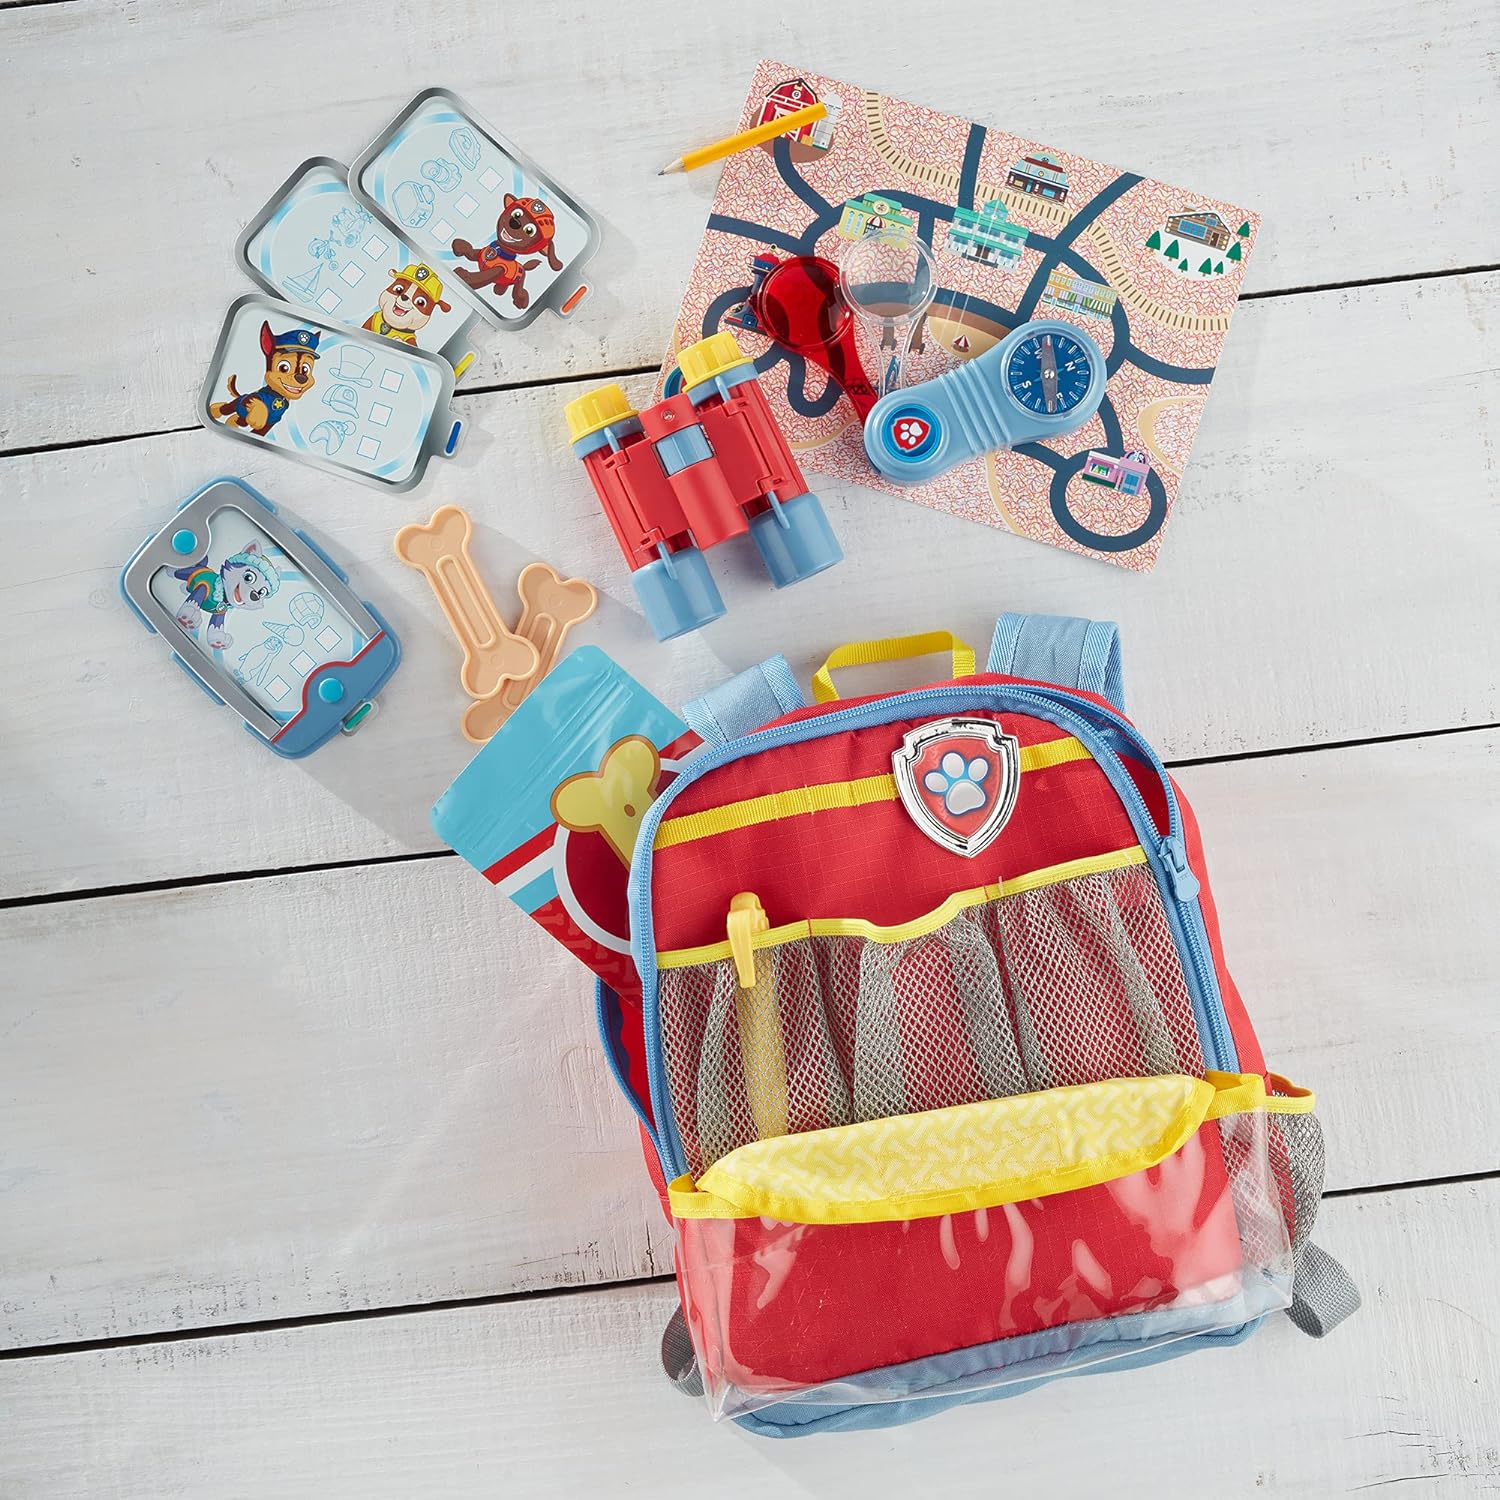 Melissa & Doug PAW Patrol Pup Backpack Role Play Set (15 Pieces) - PAW Patrol Adventure Pack, Toys, Pretend Play Outdoor Gear